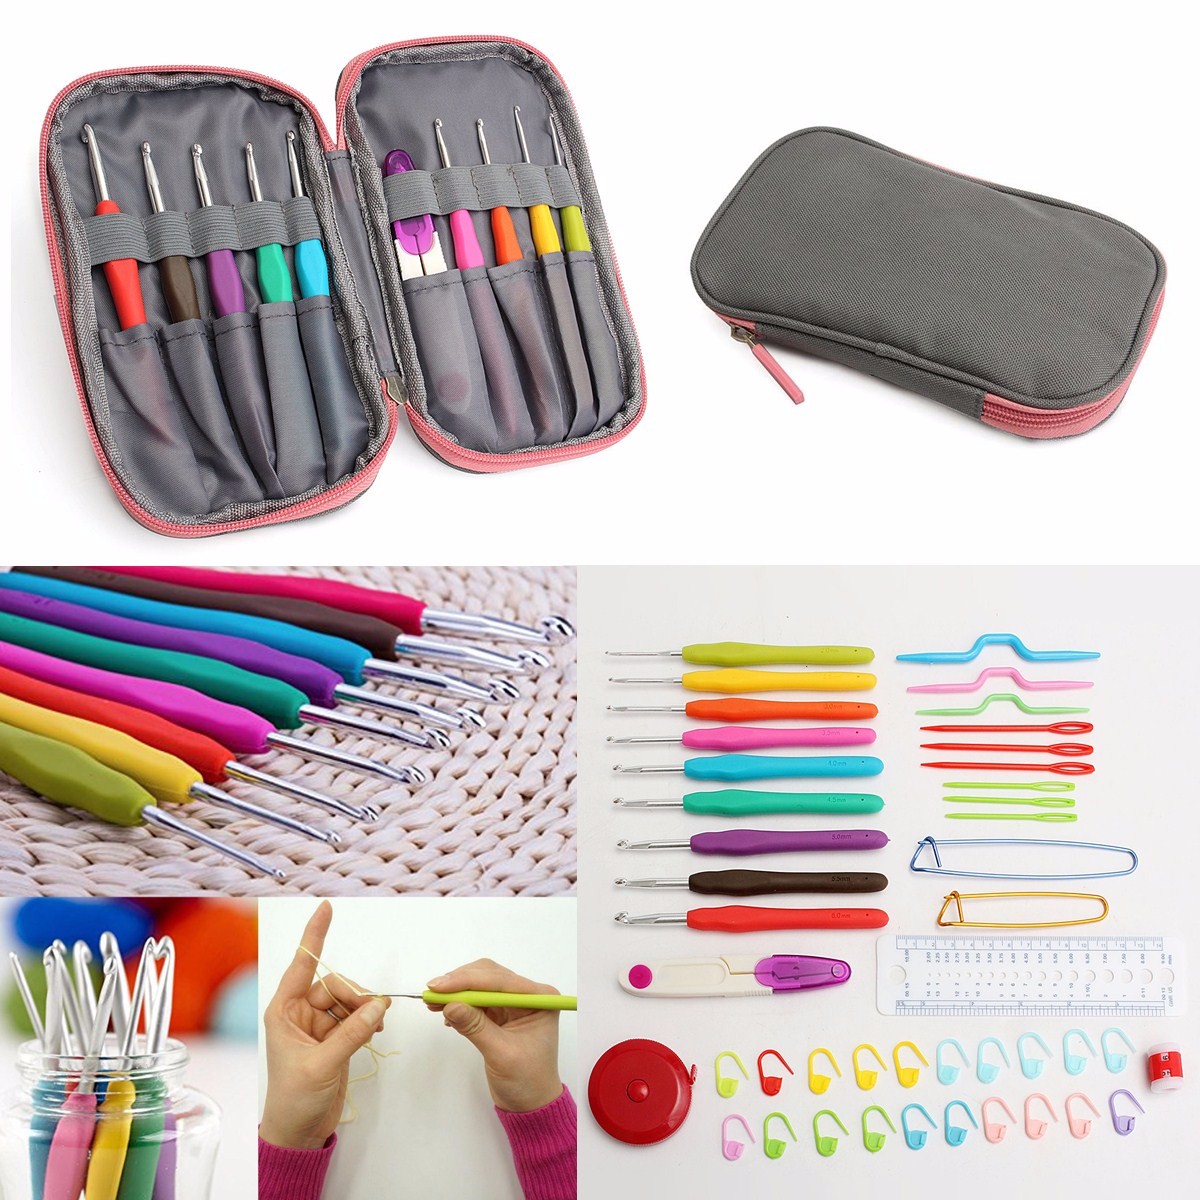 

Crochet Needle Hooks Set Organiser Case AccBearded Needle Suit With 45 Piece Attach One Storage Bag